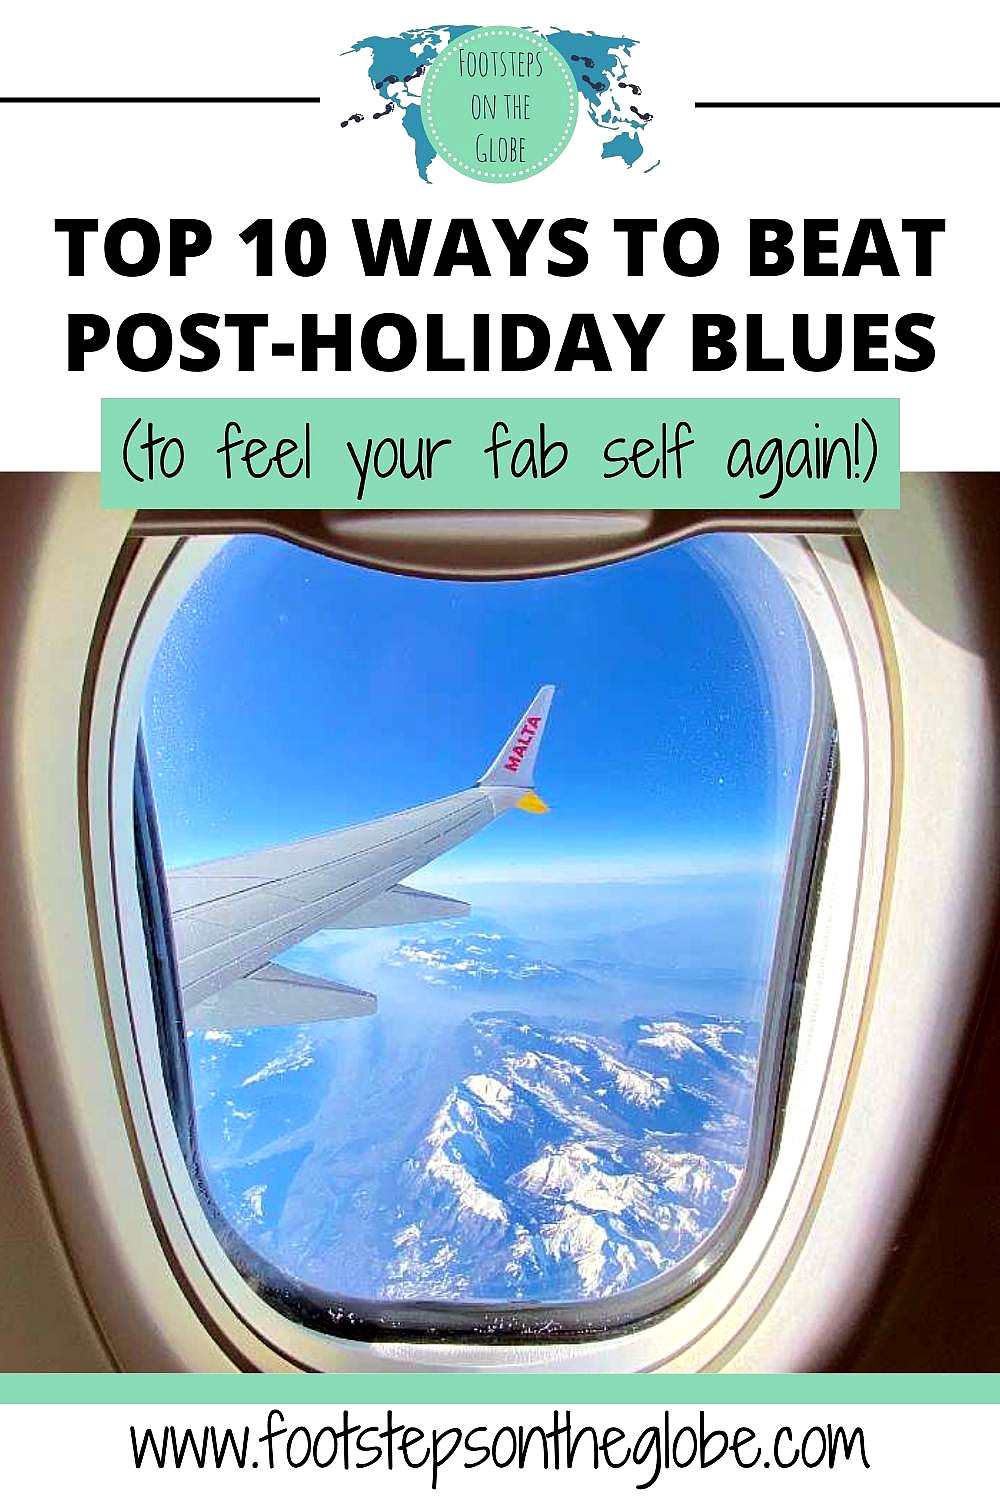 Pinterest image of a plane window with the French Alps in the background and a plane wing with Malta Airways on it and the text: "Top 10 ways to beat post holiday blues to feel your fab self again!"